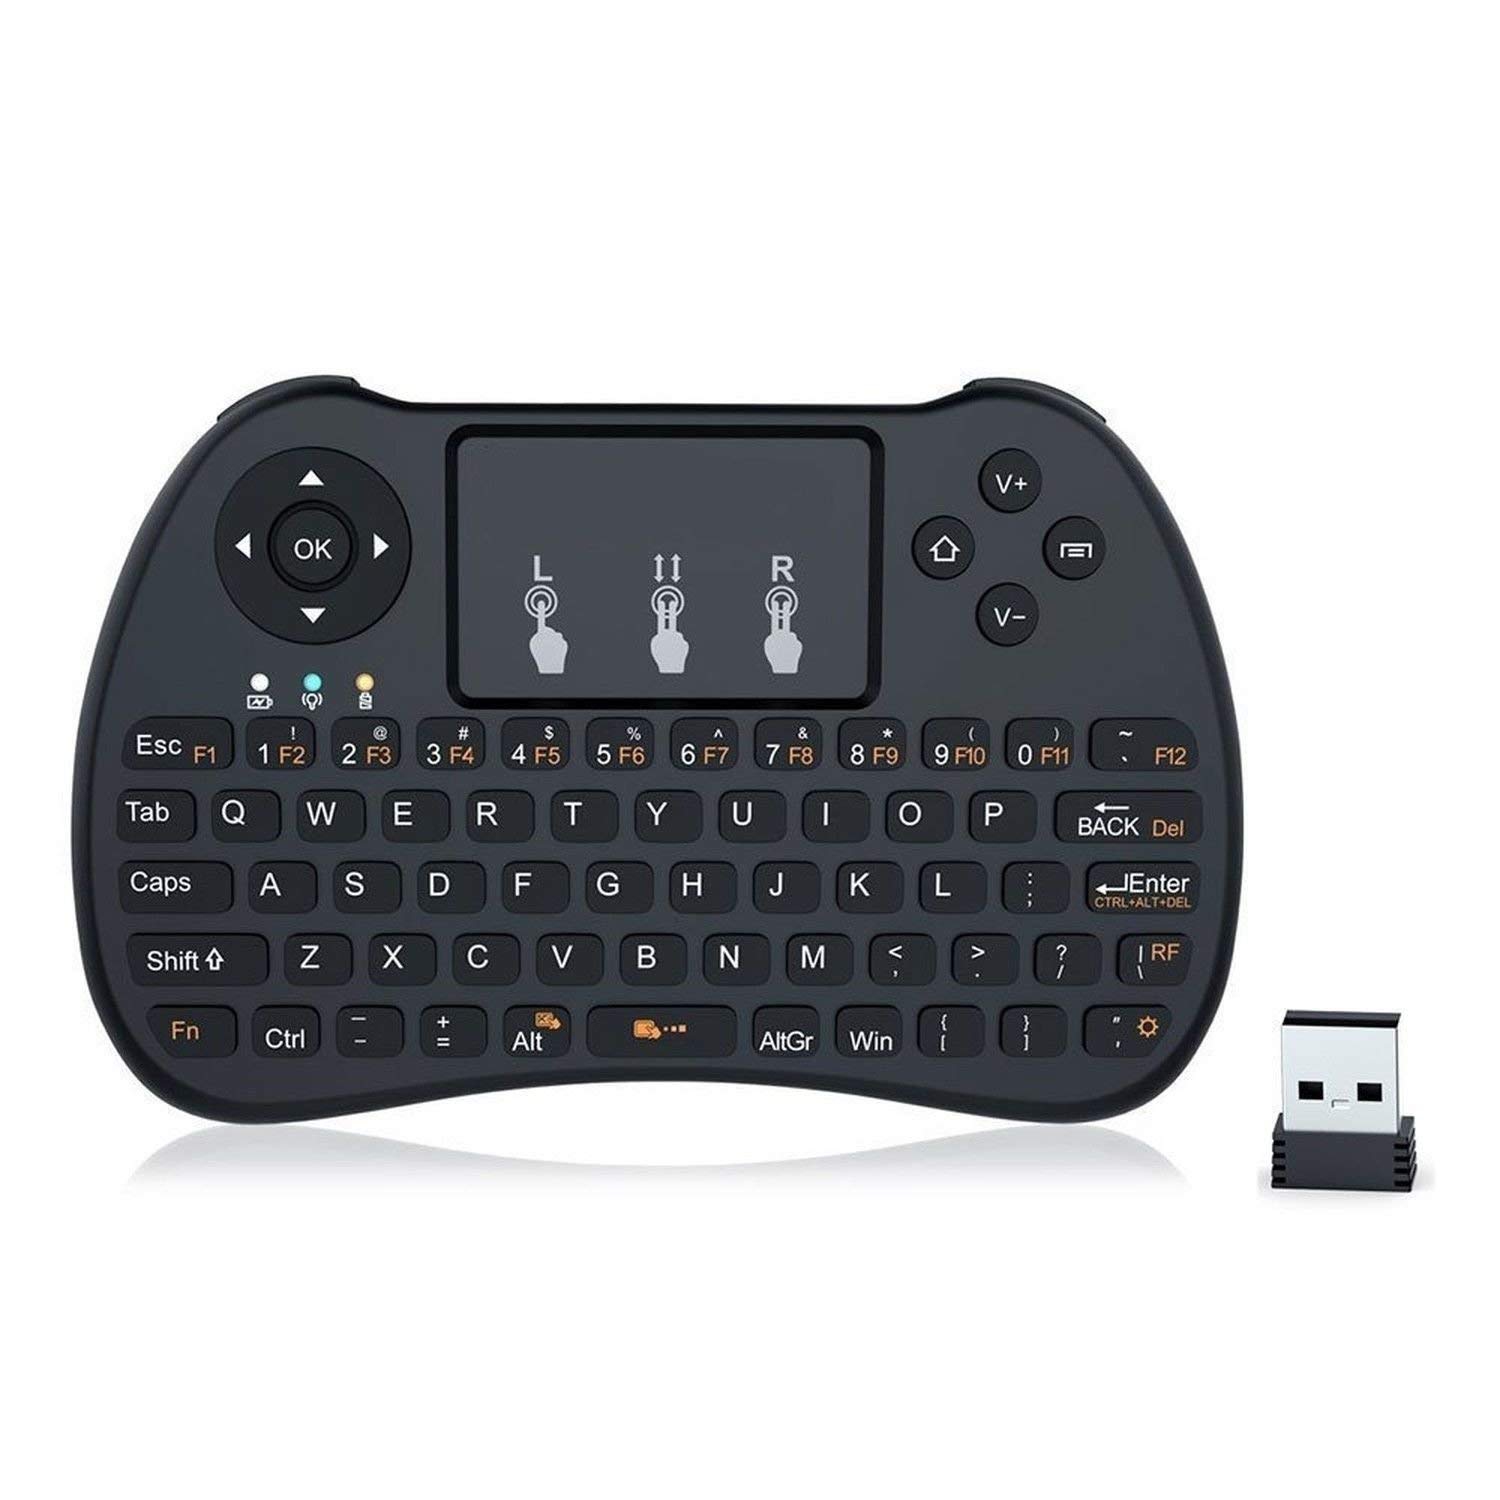 GIZMOOR Eny H9 Mini Keyboard 2.4GHz Wireless Multi-Media Portable Keyboard Air Remote for PC, Notebook, Smart TV, HTPC, Android TV Box